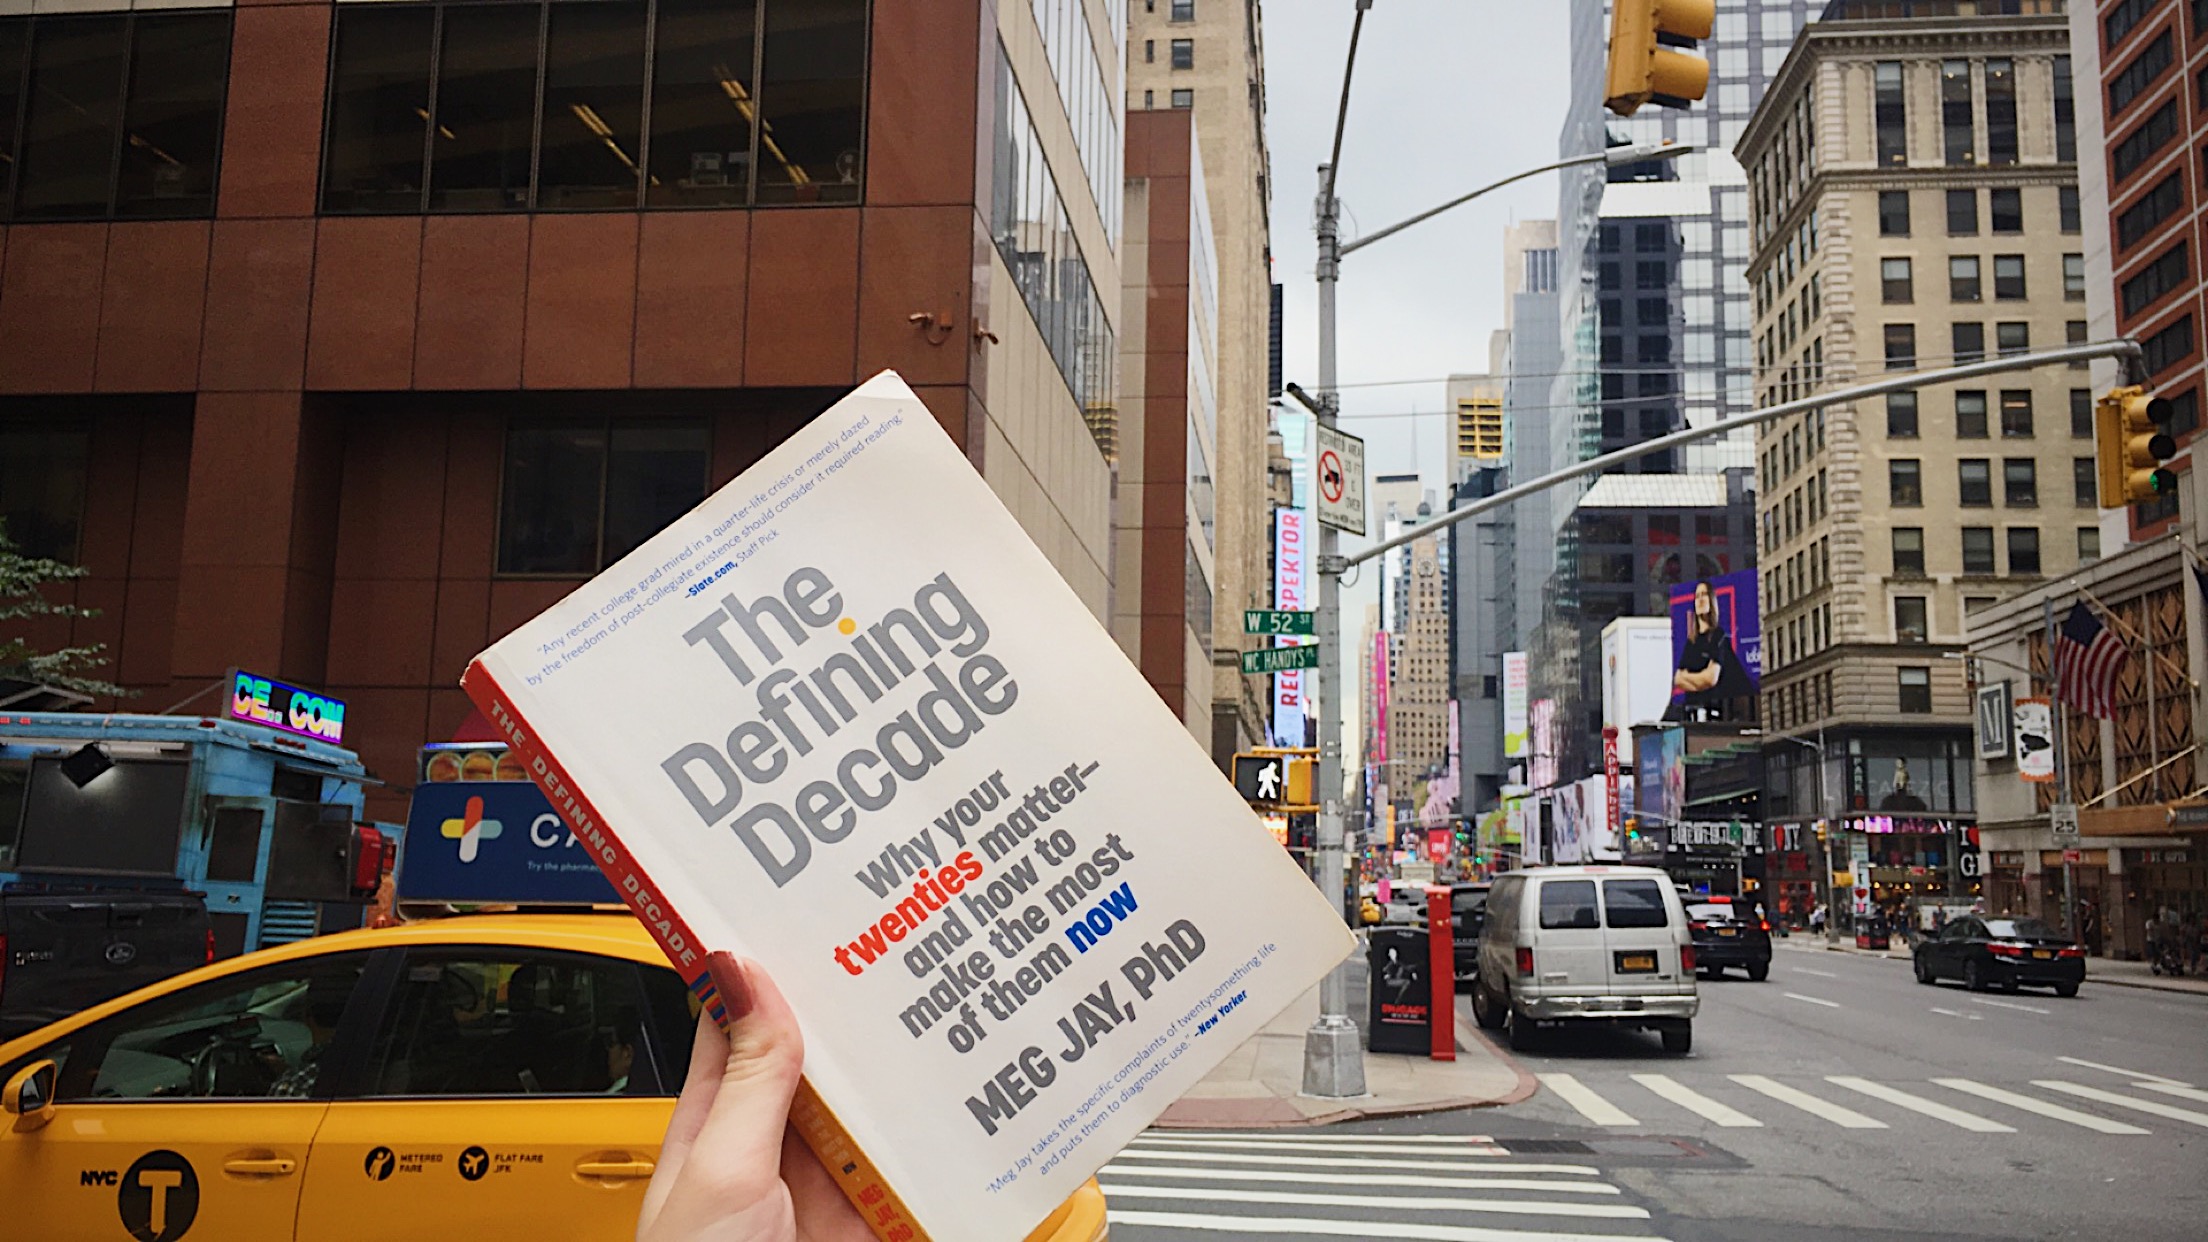 A copy of “The Defining Decade” by Dr. Meg Jay held up from a New York street against Times Square buildings.